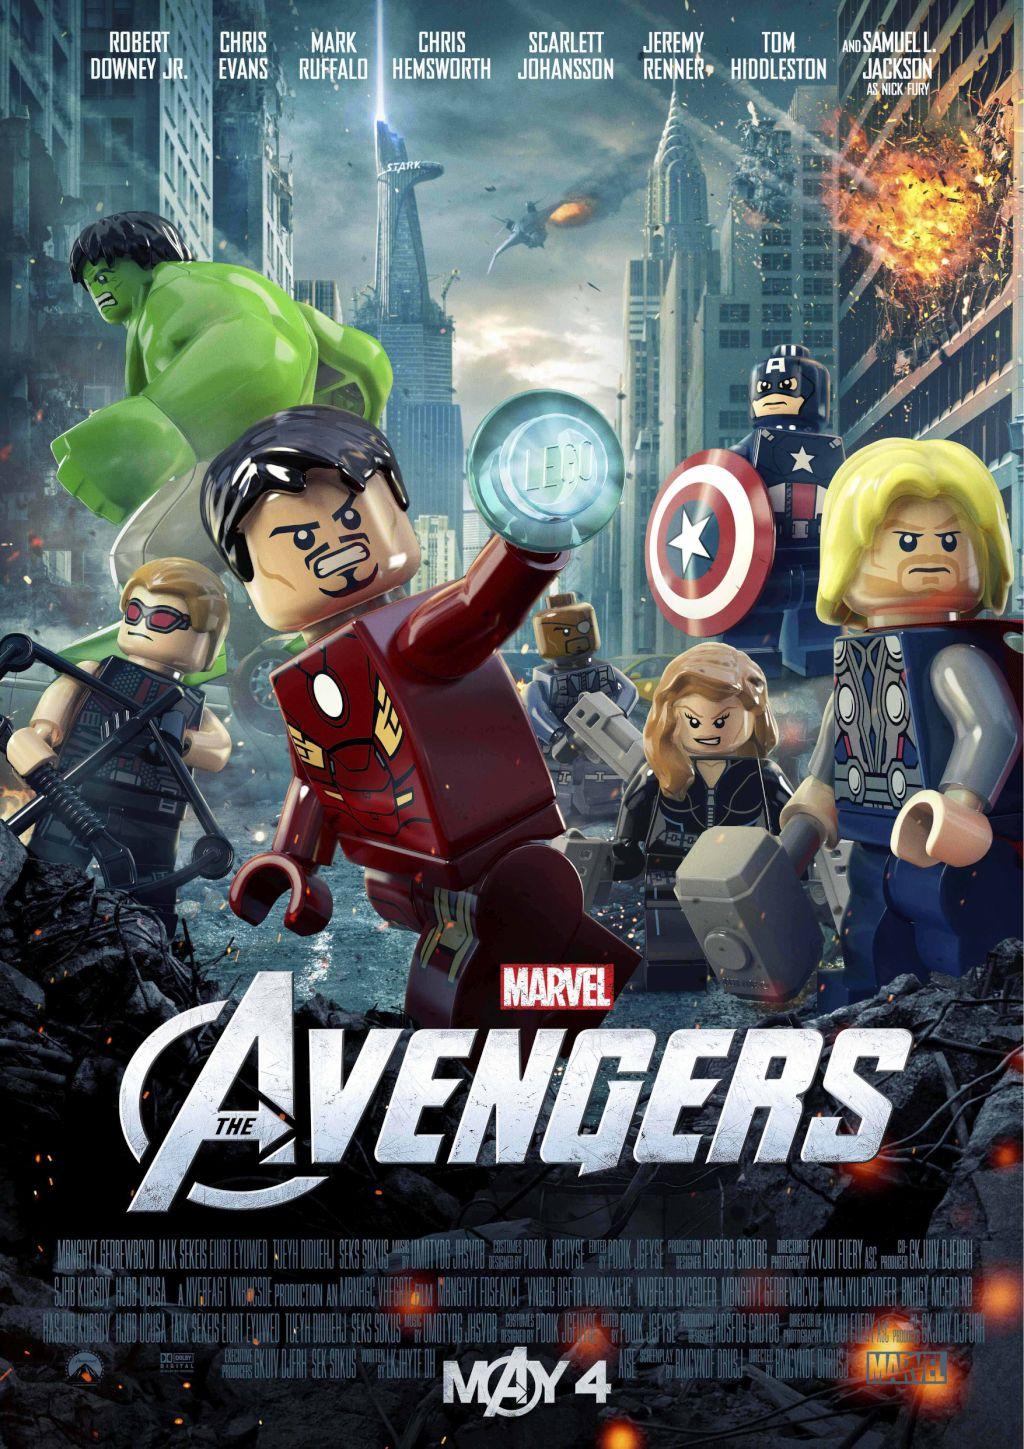 The Avengers Lego Edition Movie Poster Wallpaper Image